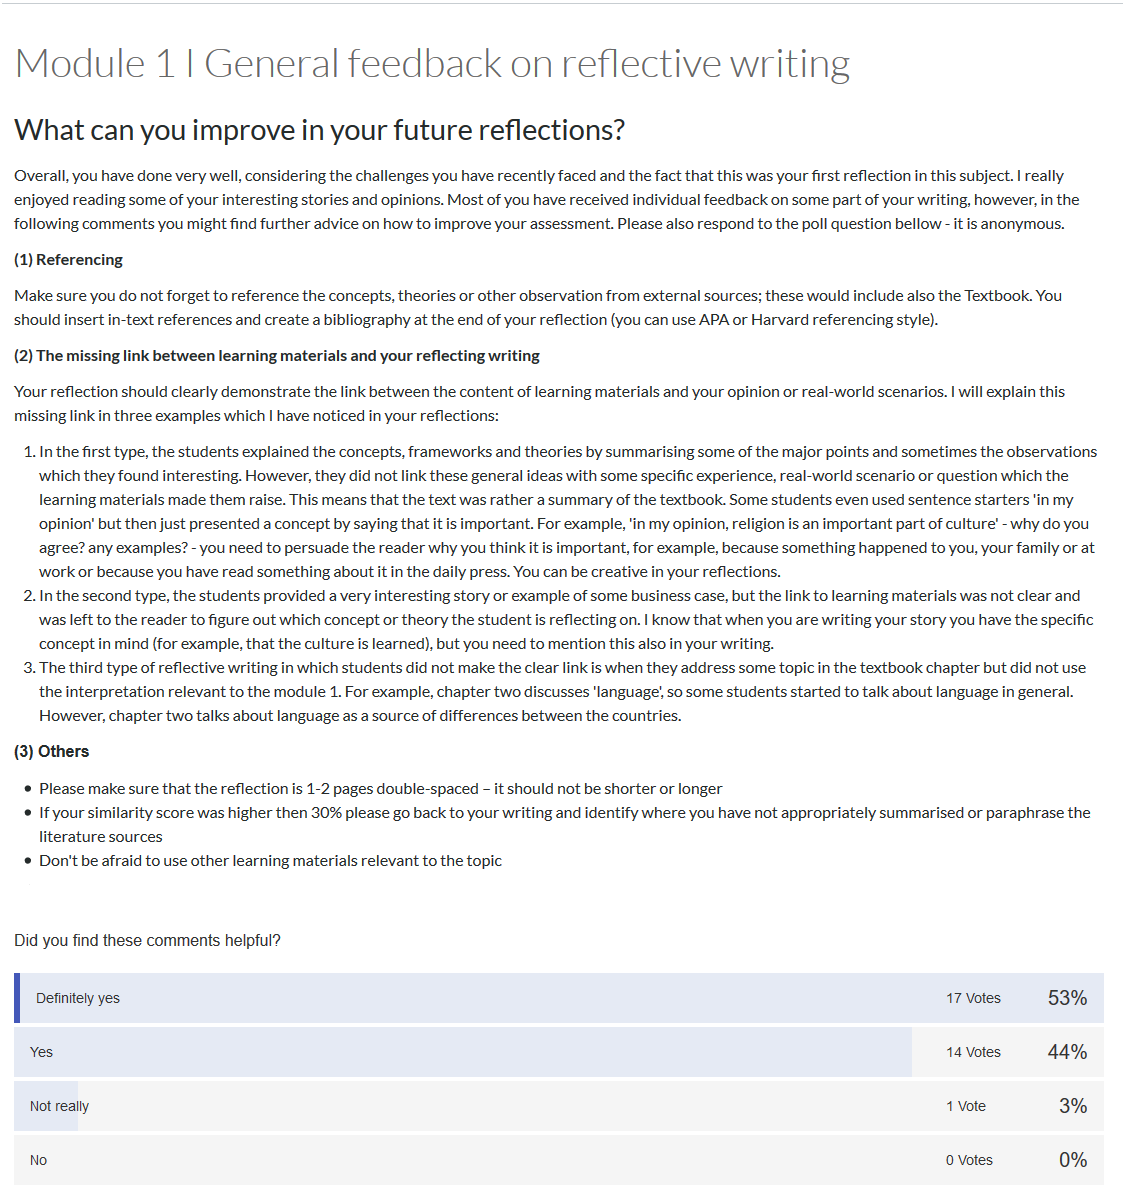 A Canvas page providing general feedback on reflective writing as well as a poll underneath to indicate whether or not this information was helpful for the students.